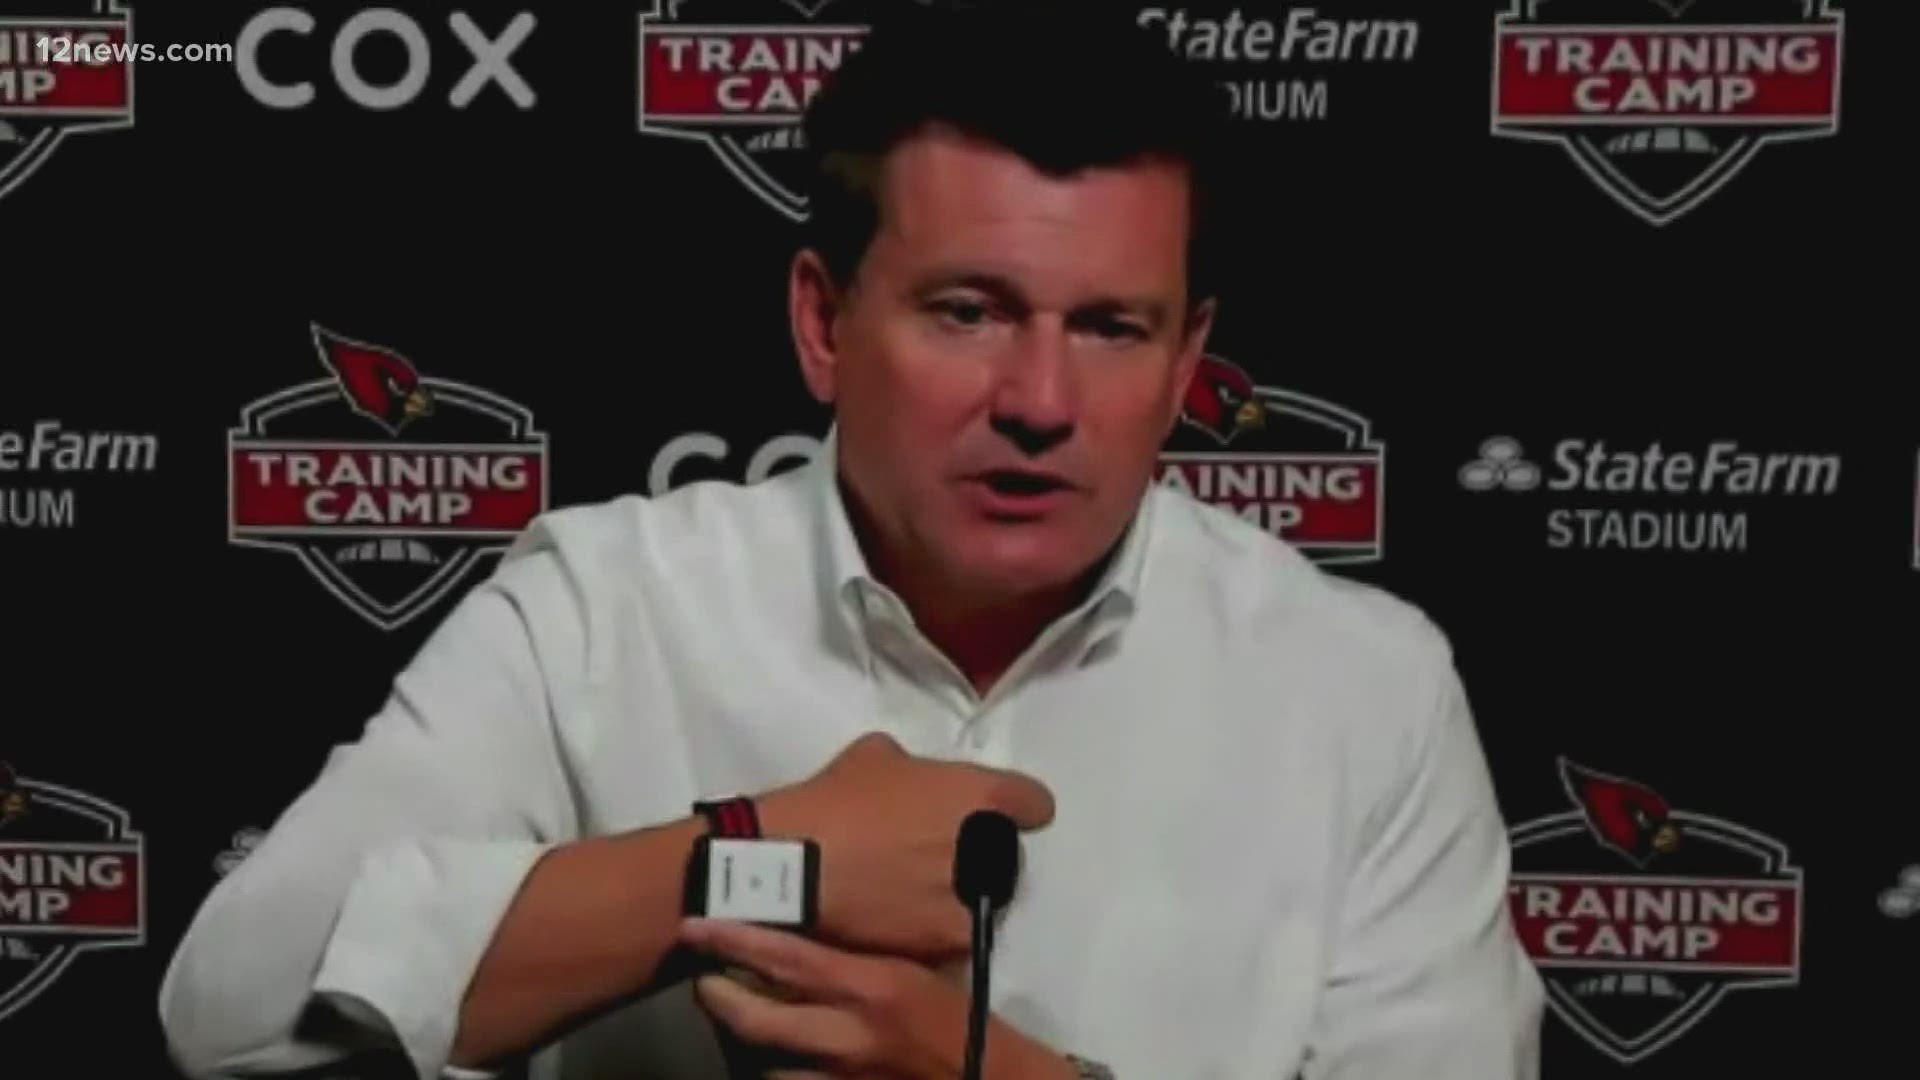 Arizona Cardinals owner Michael Bidwill, in an exclusive interview with Ryan Cody, talks team protocols with the COVID-19 pandemic and the forecast for the season.